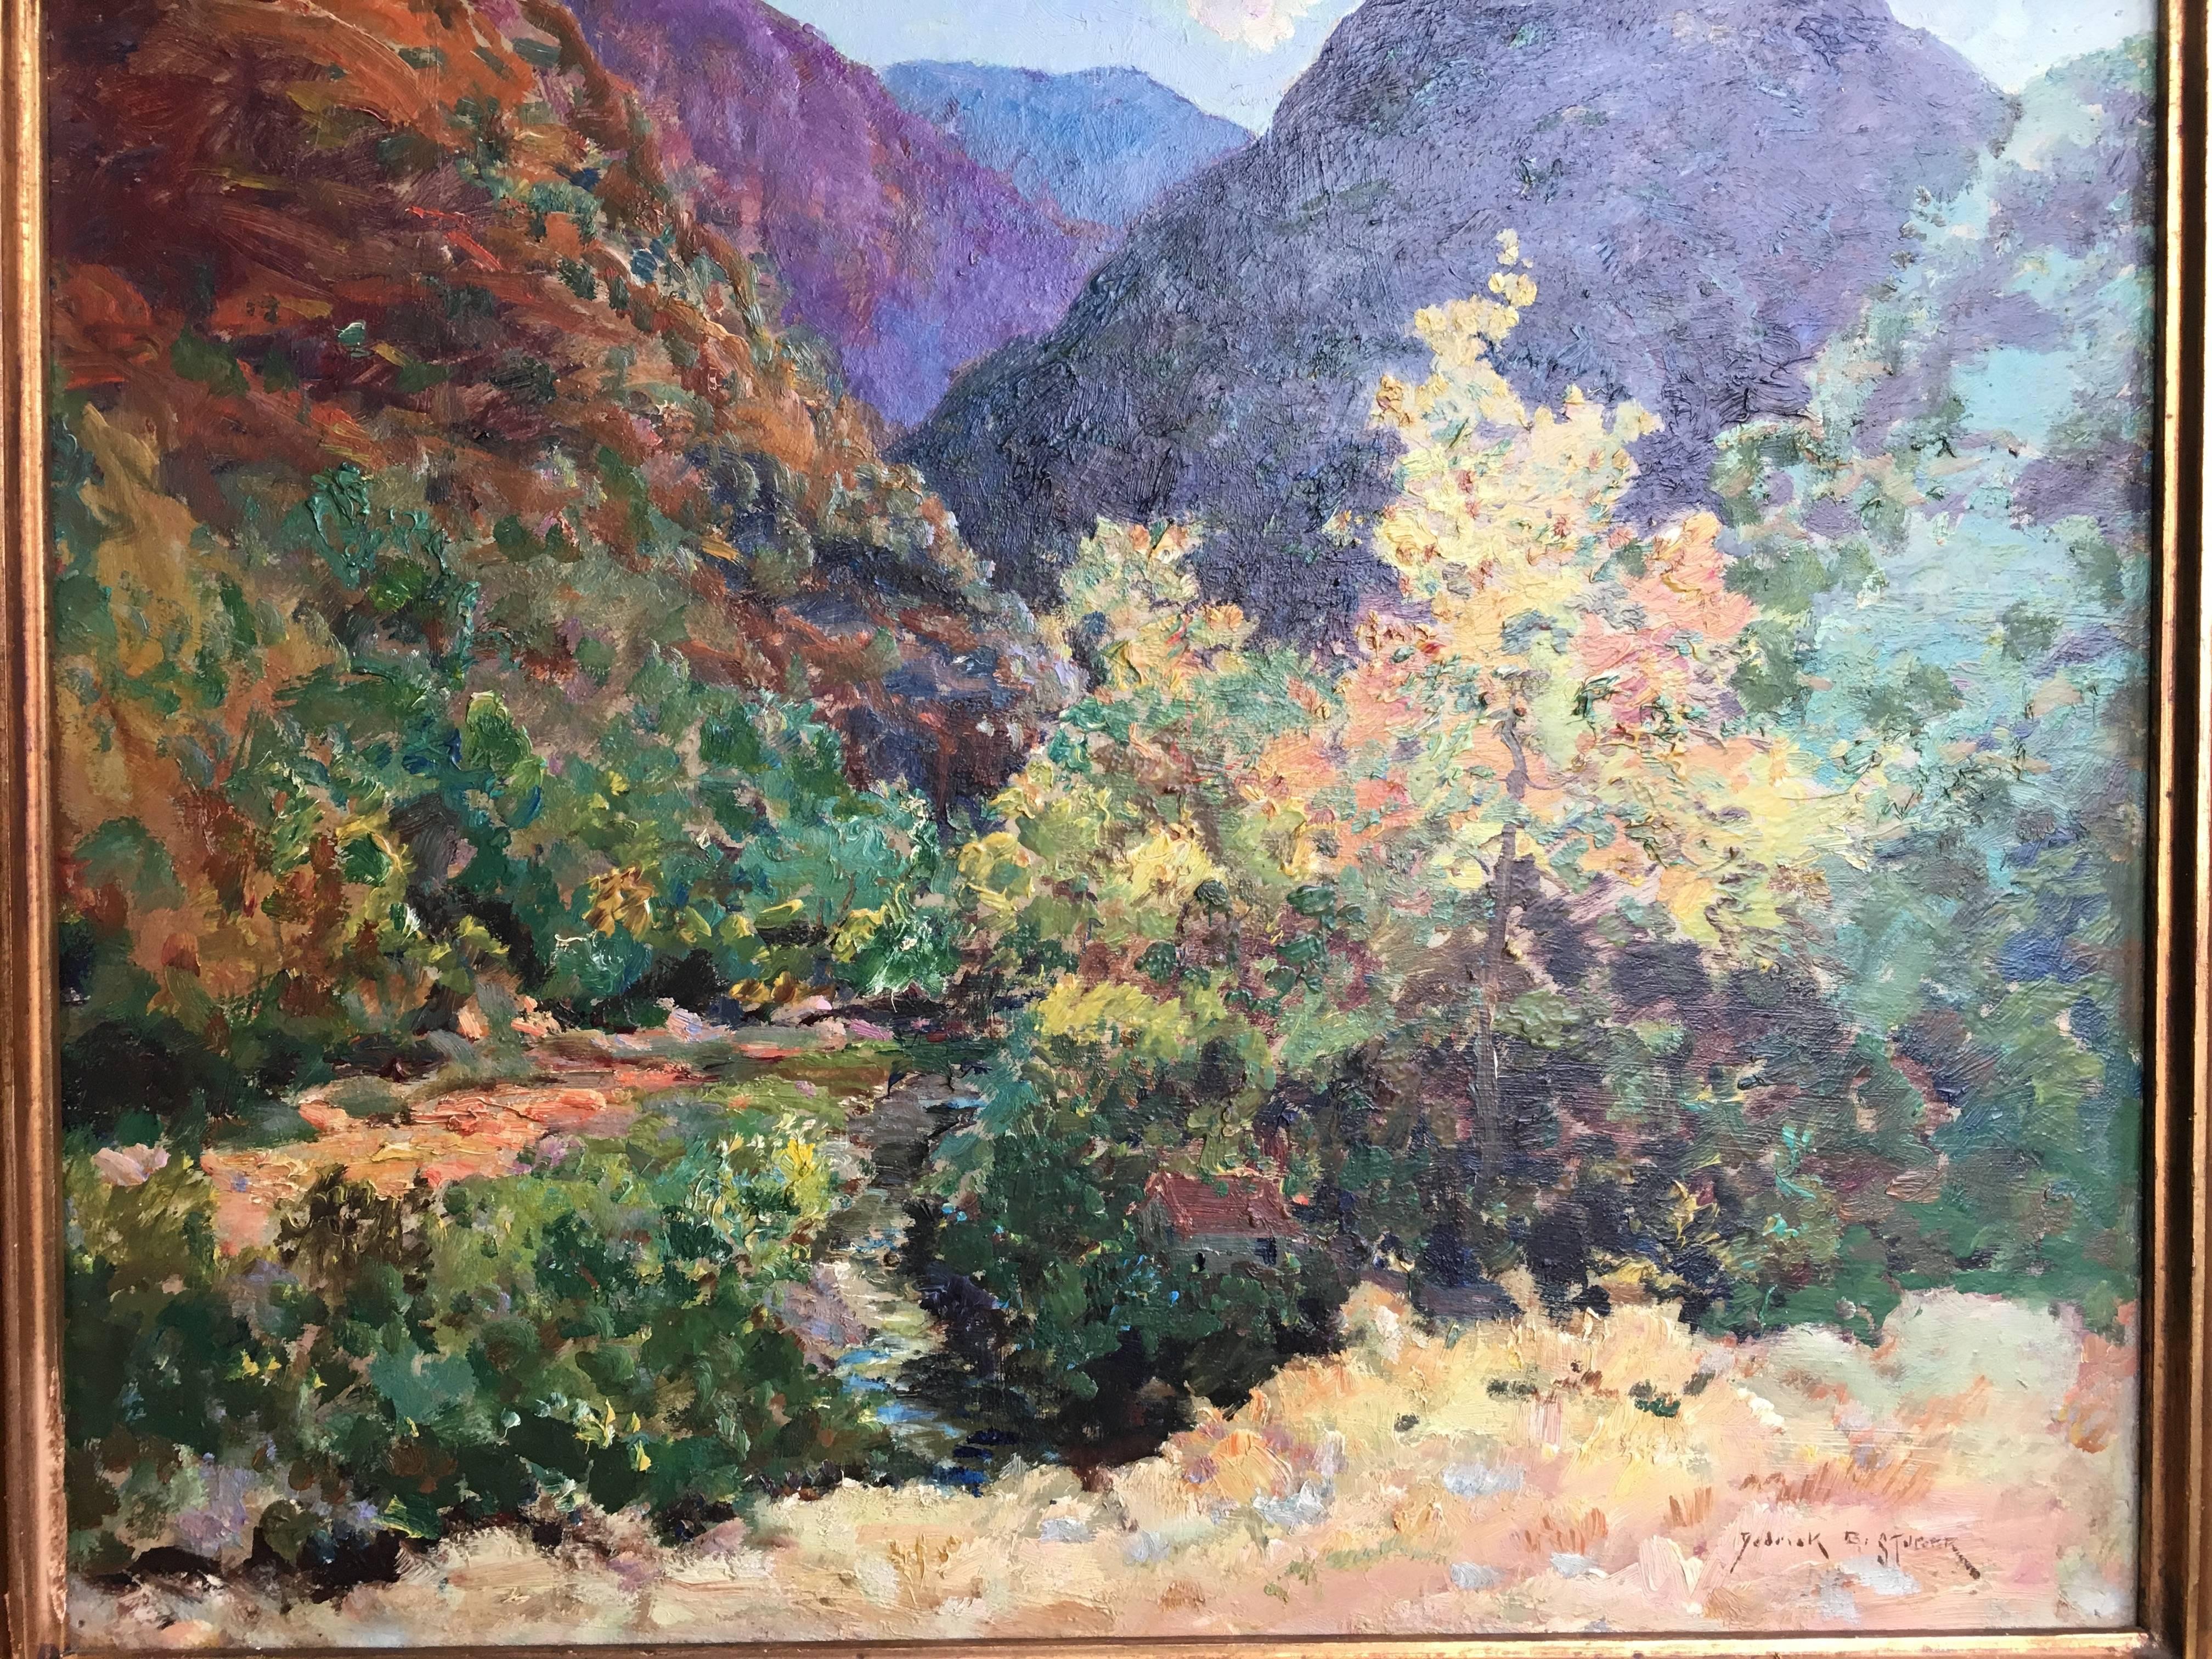 Trees in the Carmel Valley Paradise - Painting by Dedrick Stuber